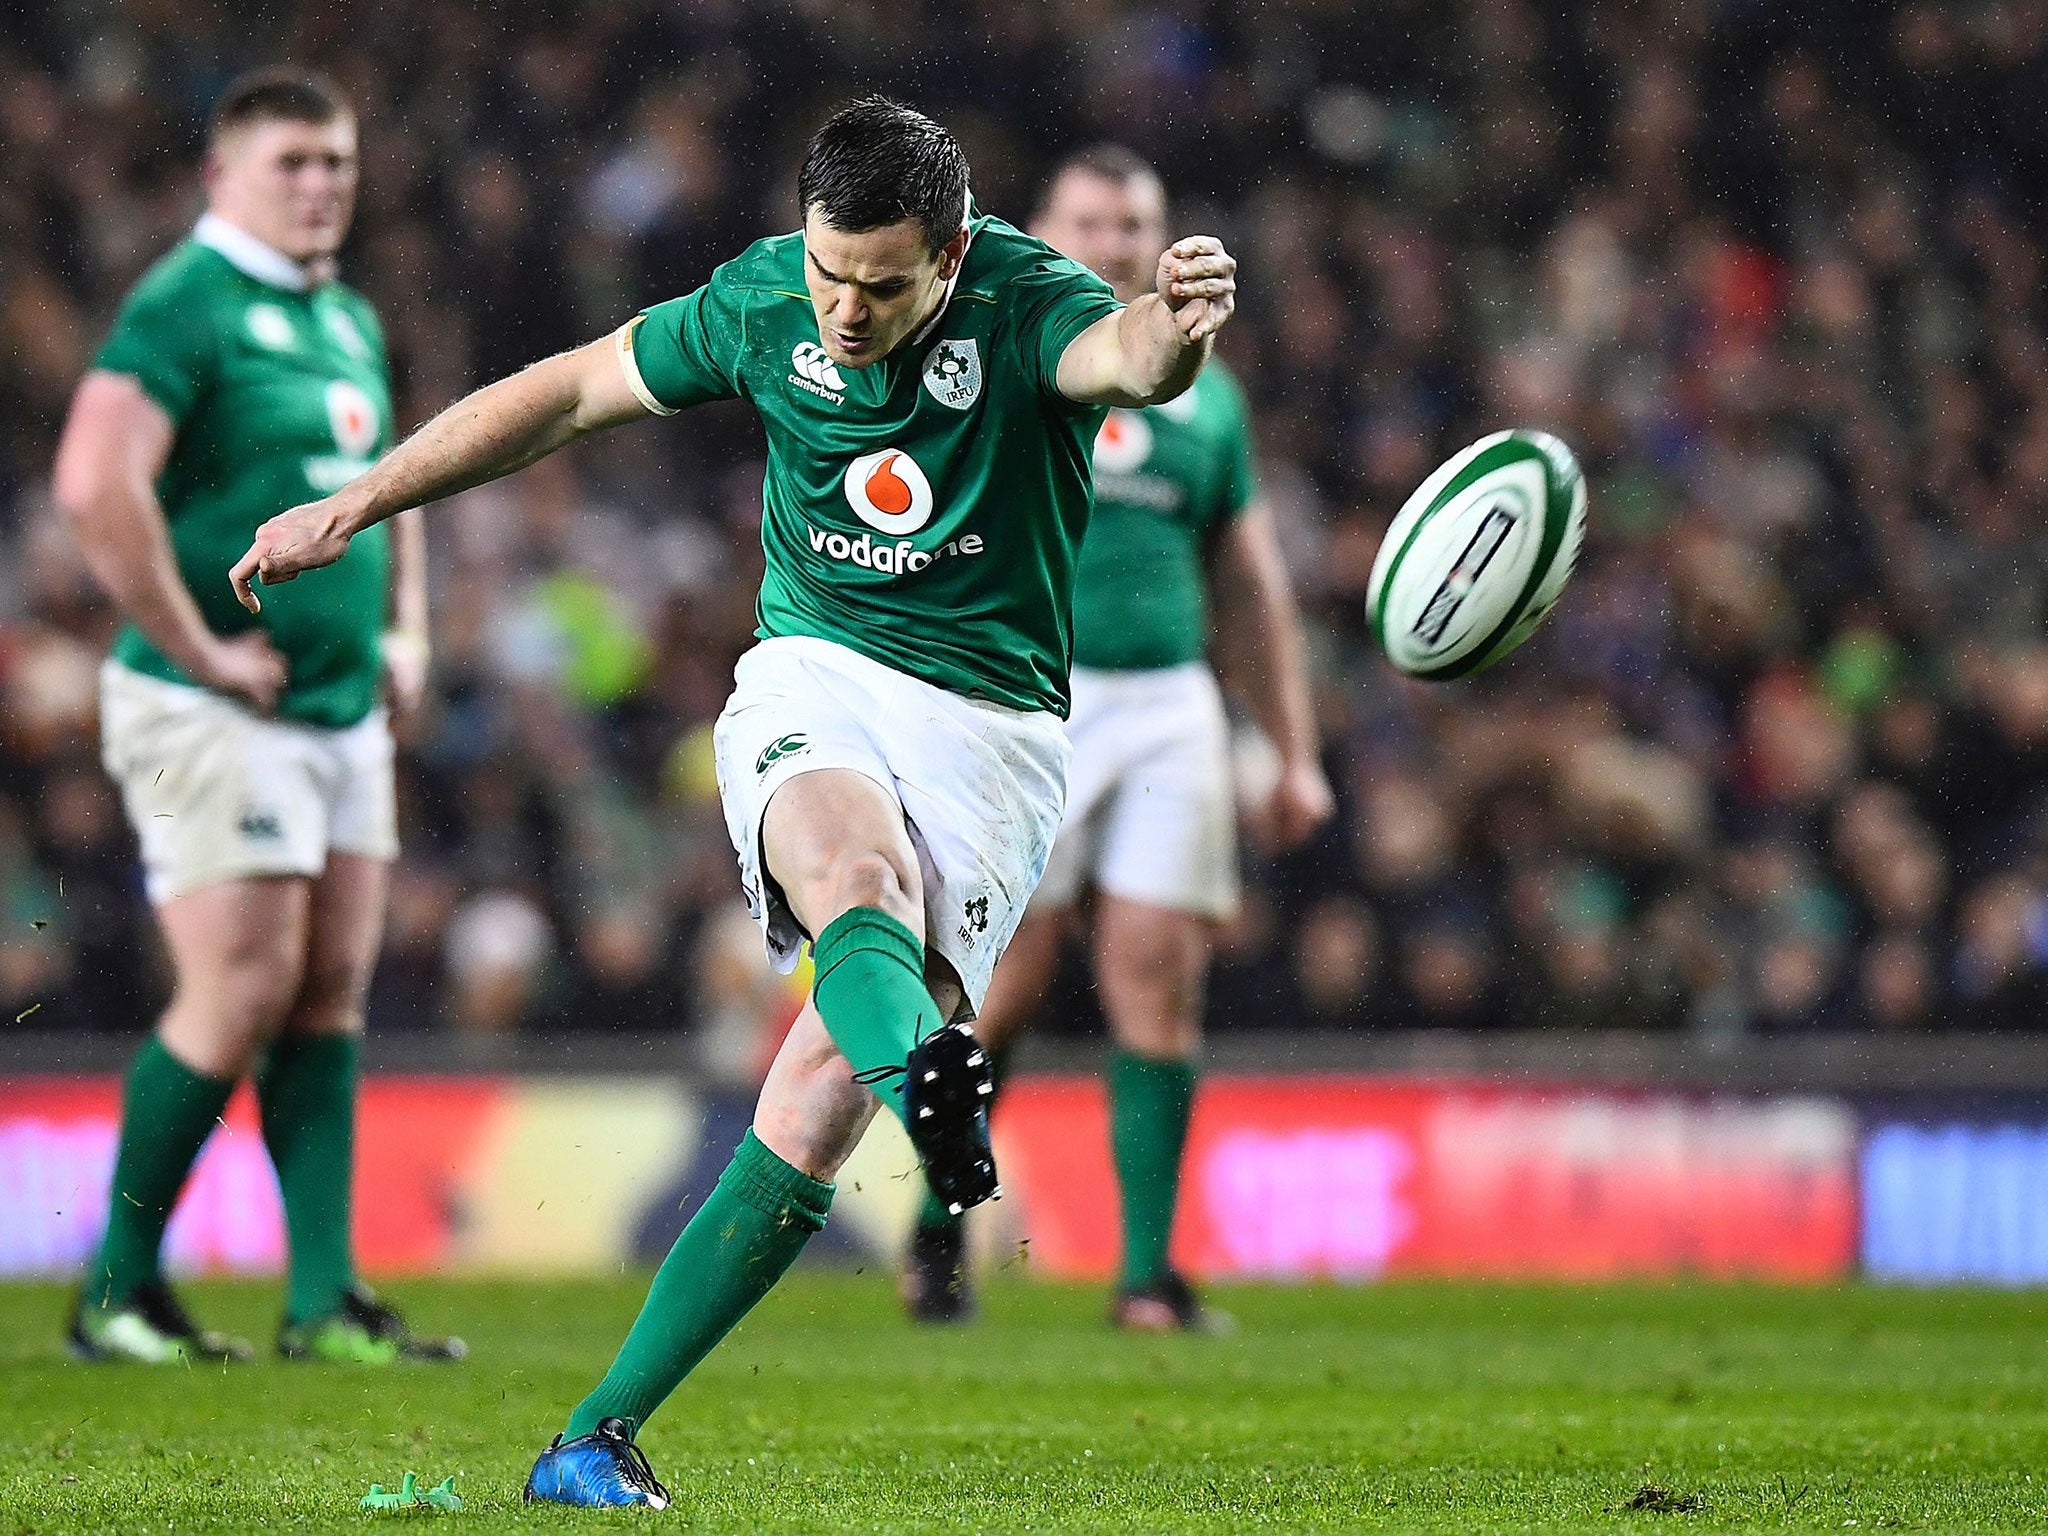 Jonathan Sexton kicks a successful penalty attempt during Ireland's win over France